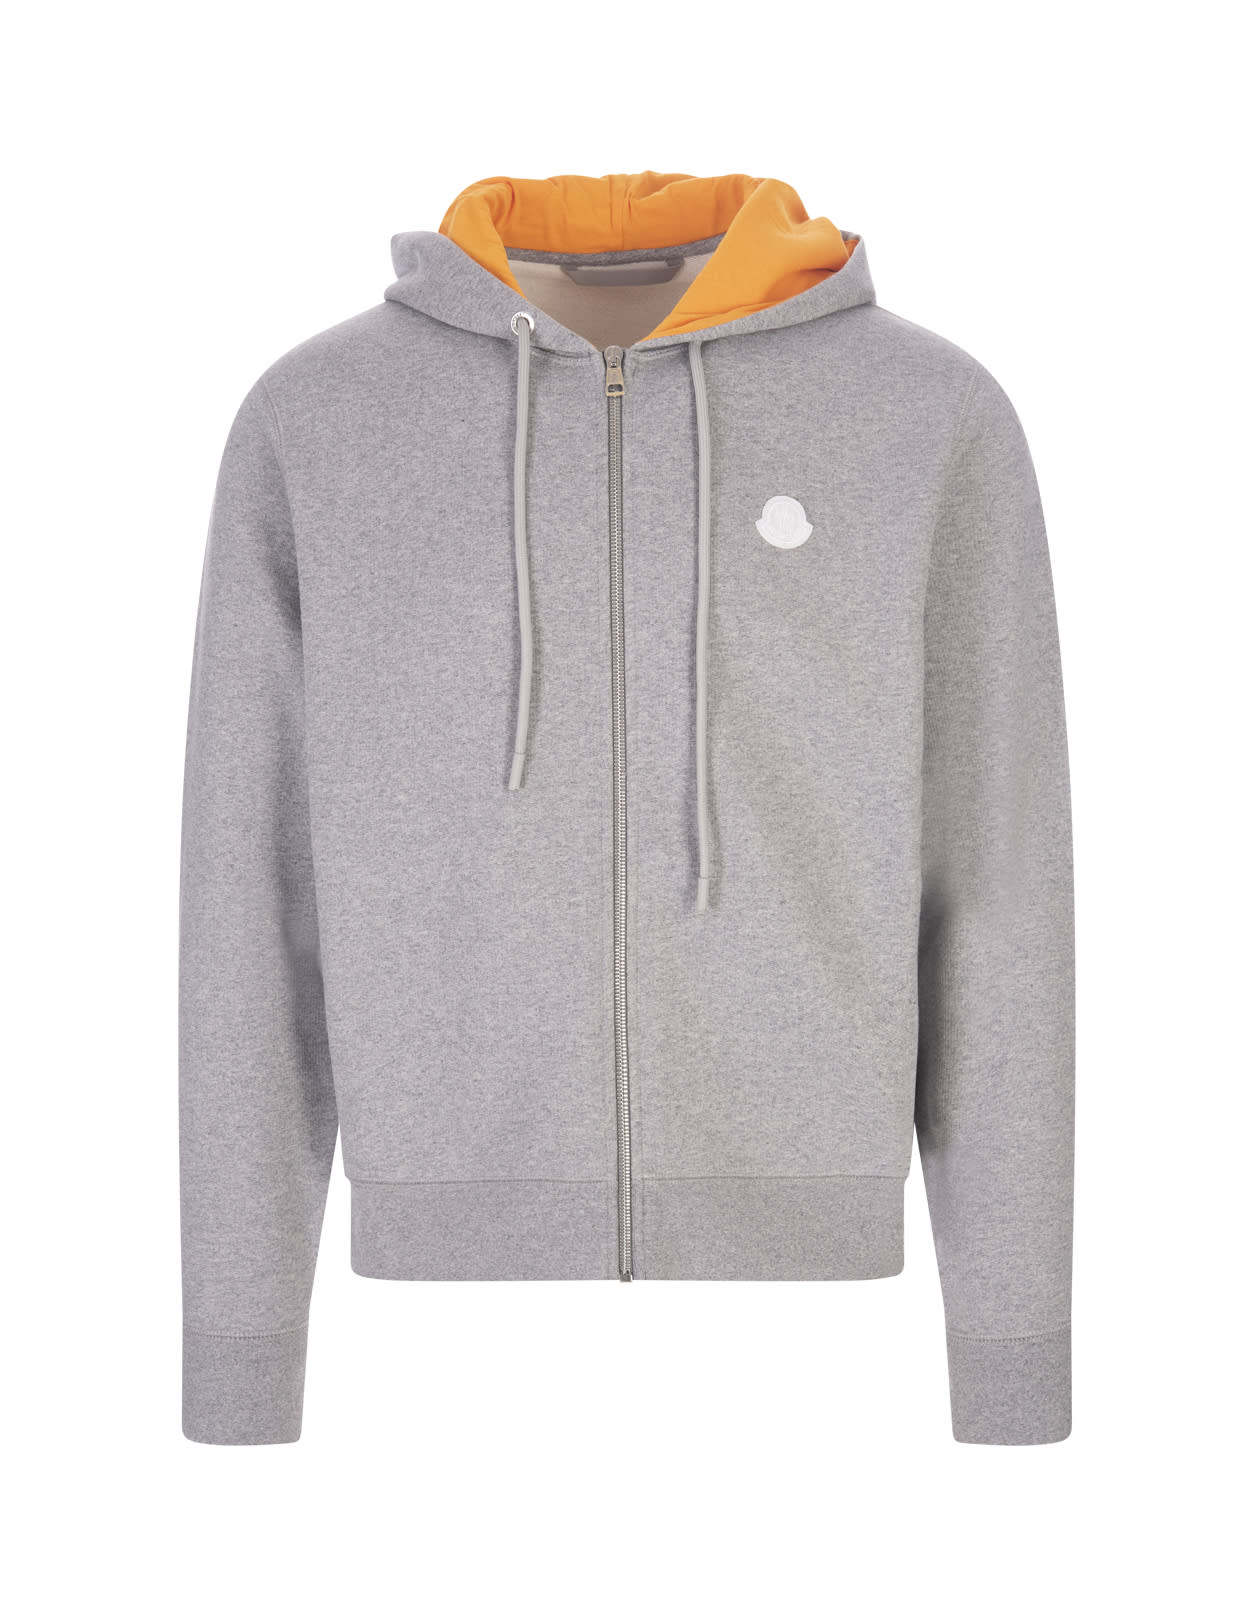 MONCLER GREY AND ORANGE ZIPPED HOODIE WITH LOGO